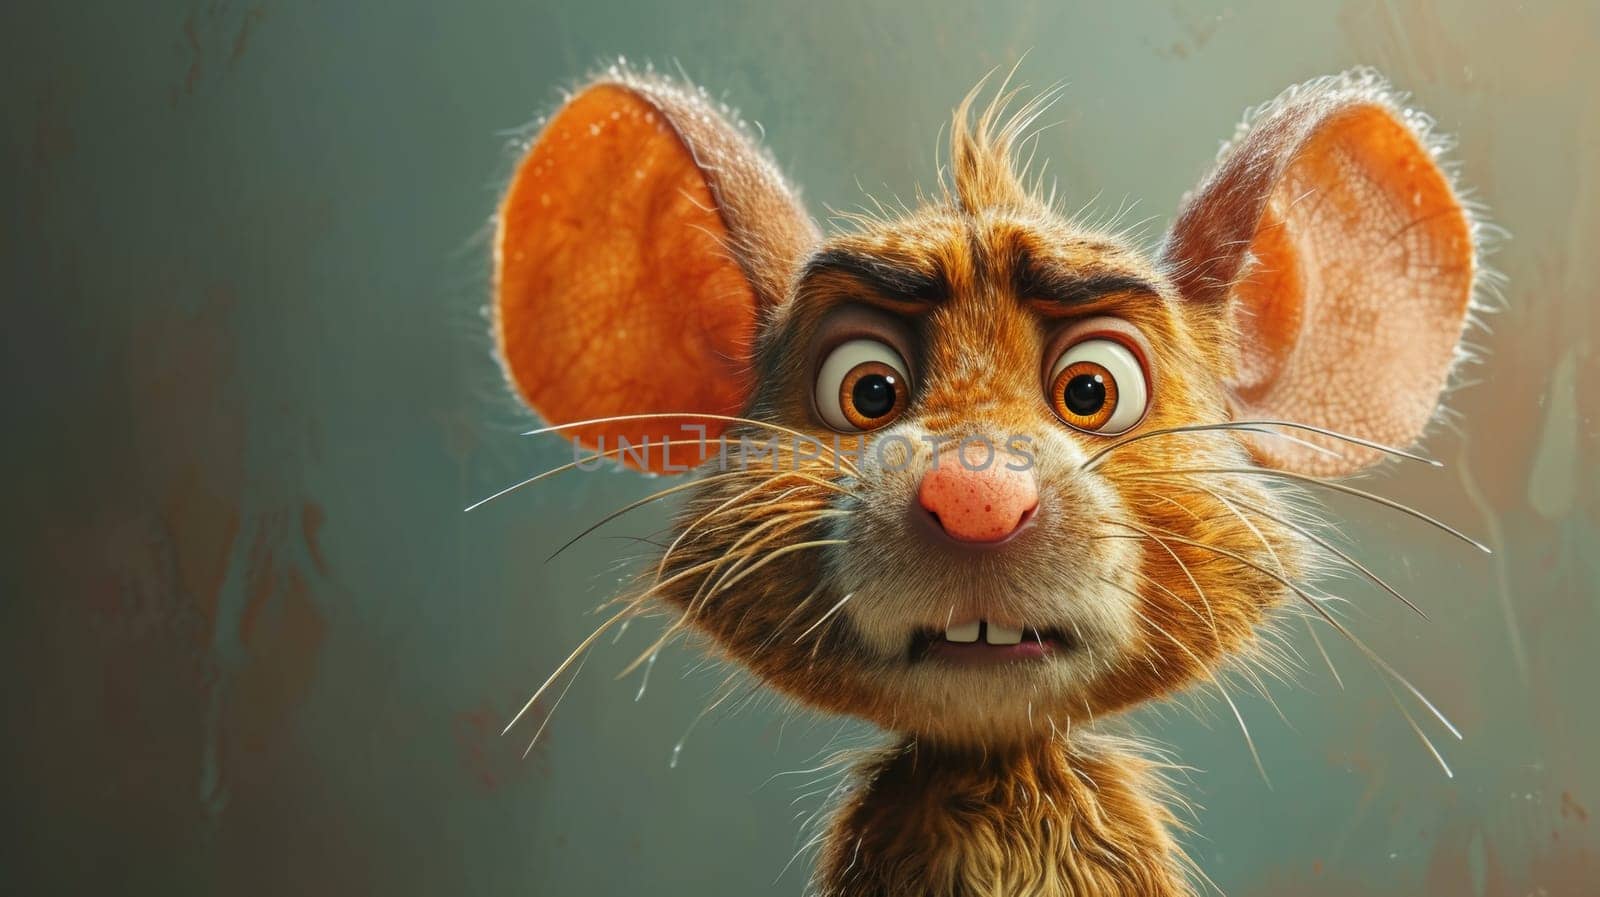 A close up of a mouse with big ears and an angry look, AI by starush